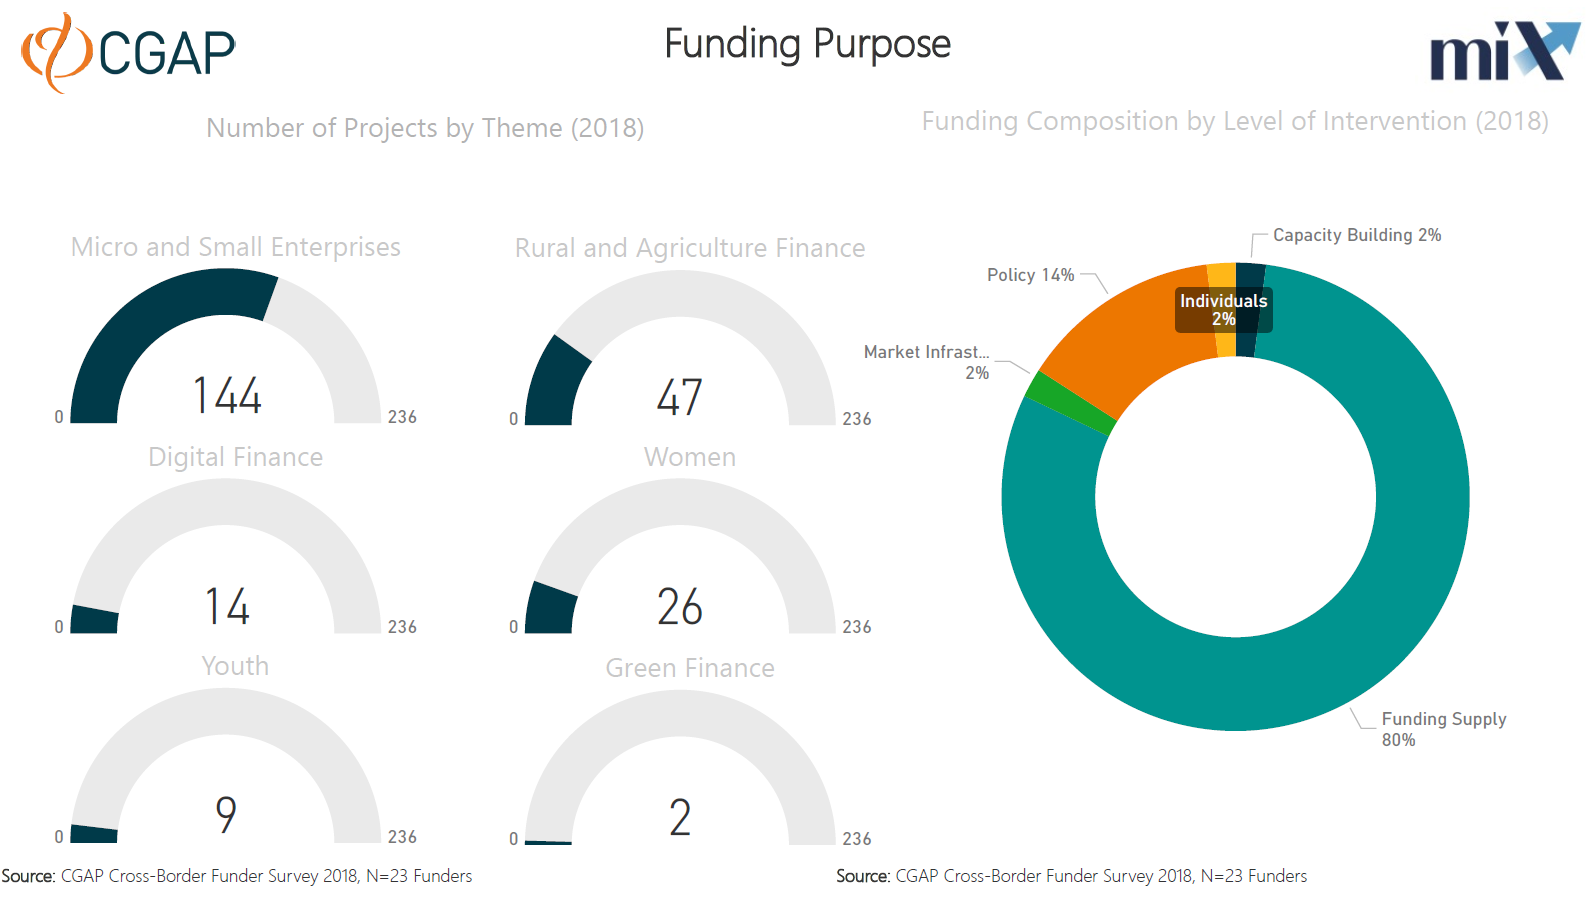 What do funders fund in East Asia and the Pacific? (Themes, funding purpose)